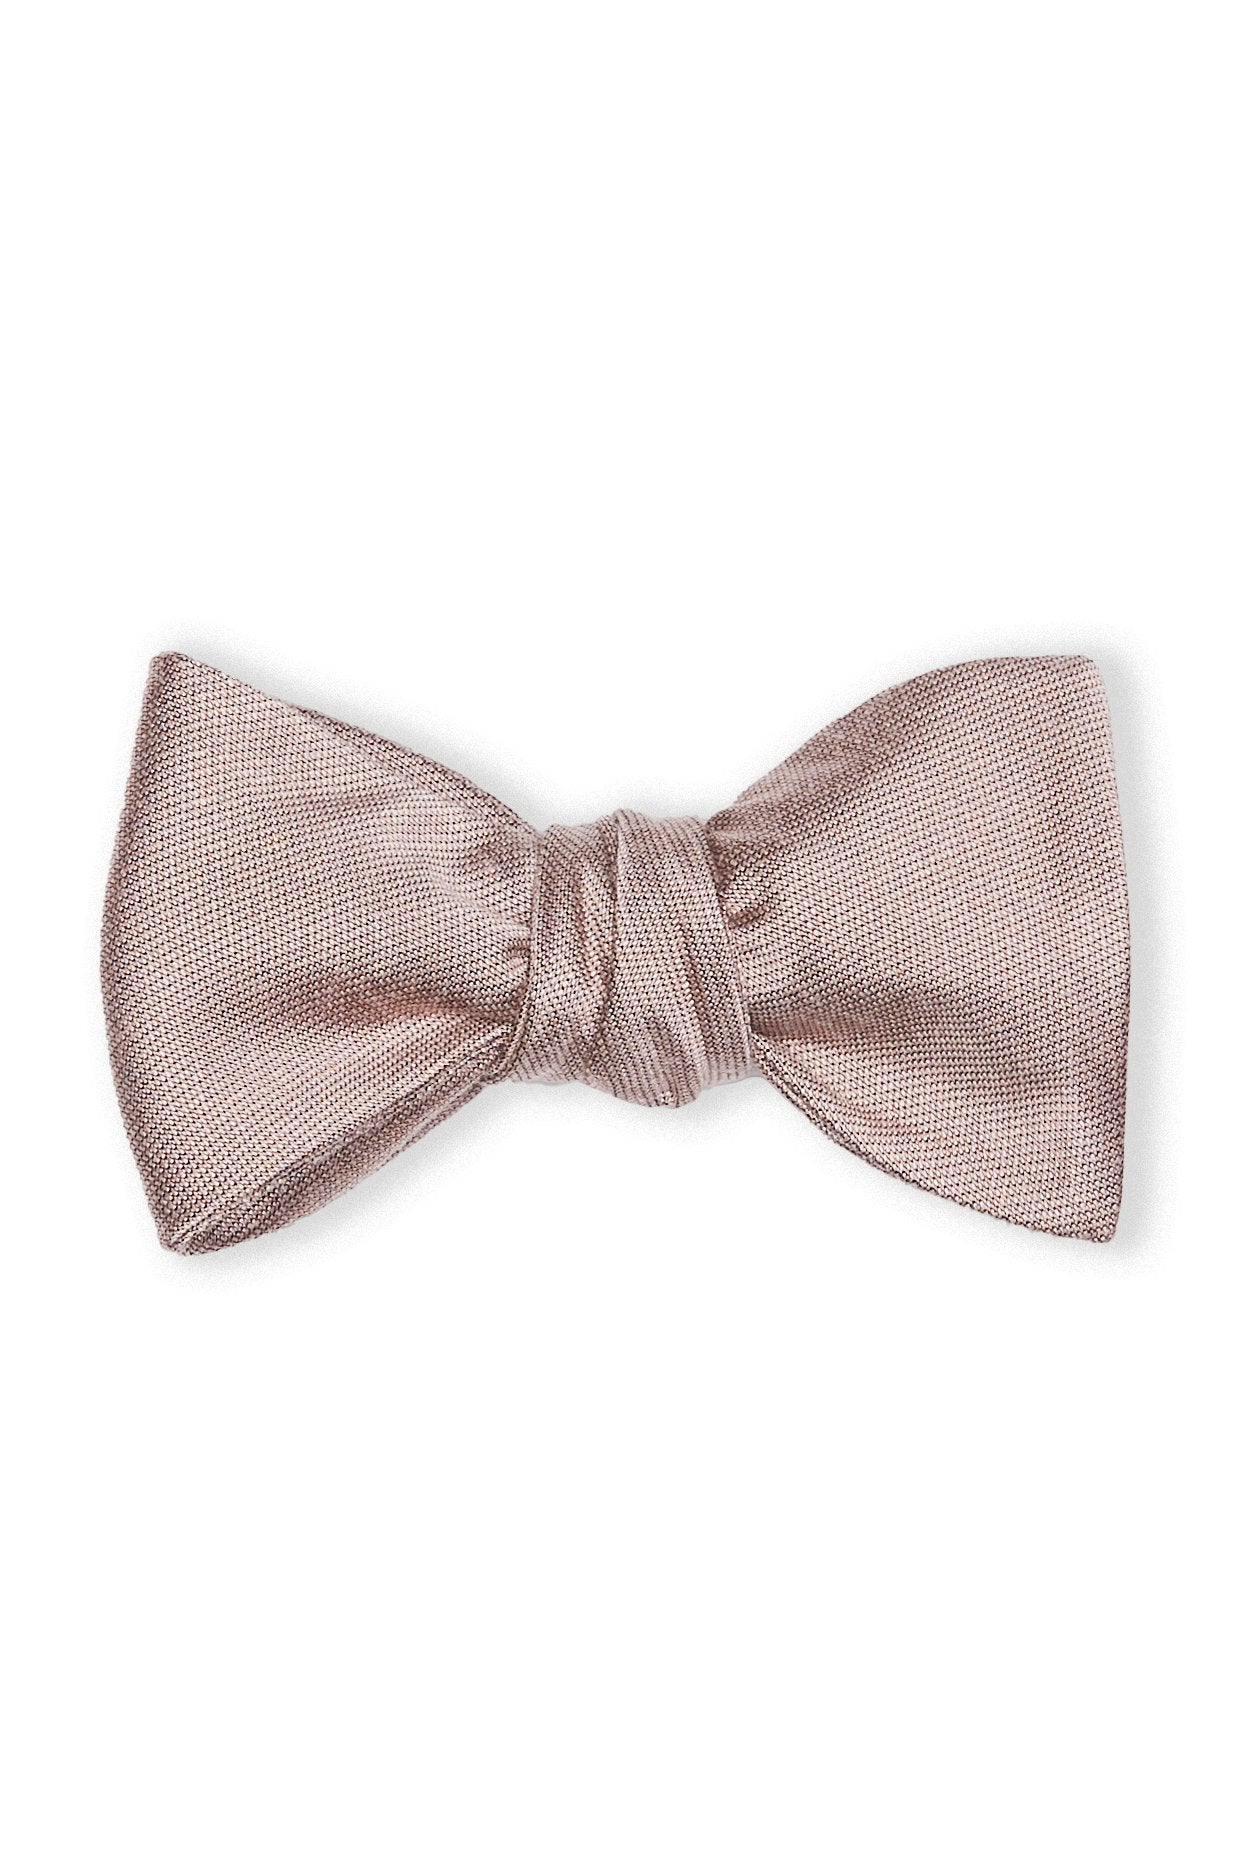 Daniel Bow Tie in mauve by Birdy Grey, front view